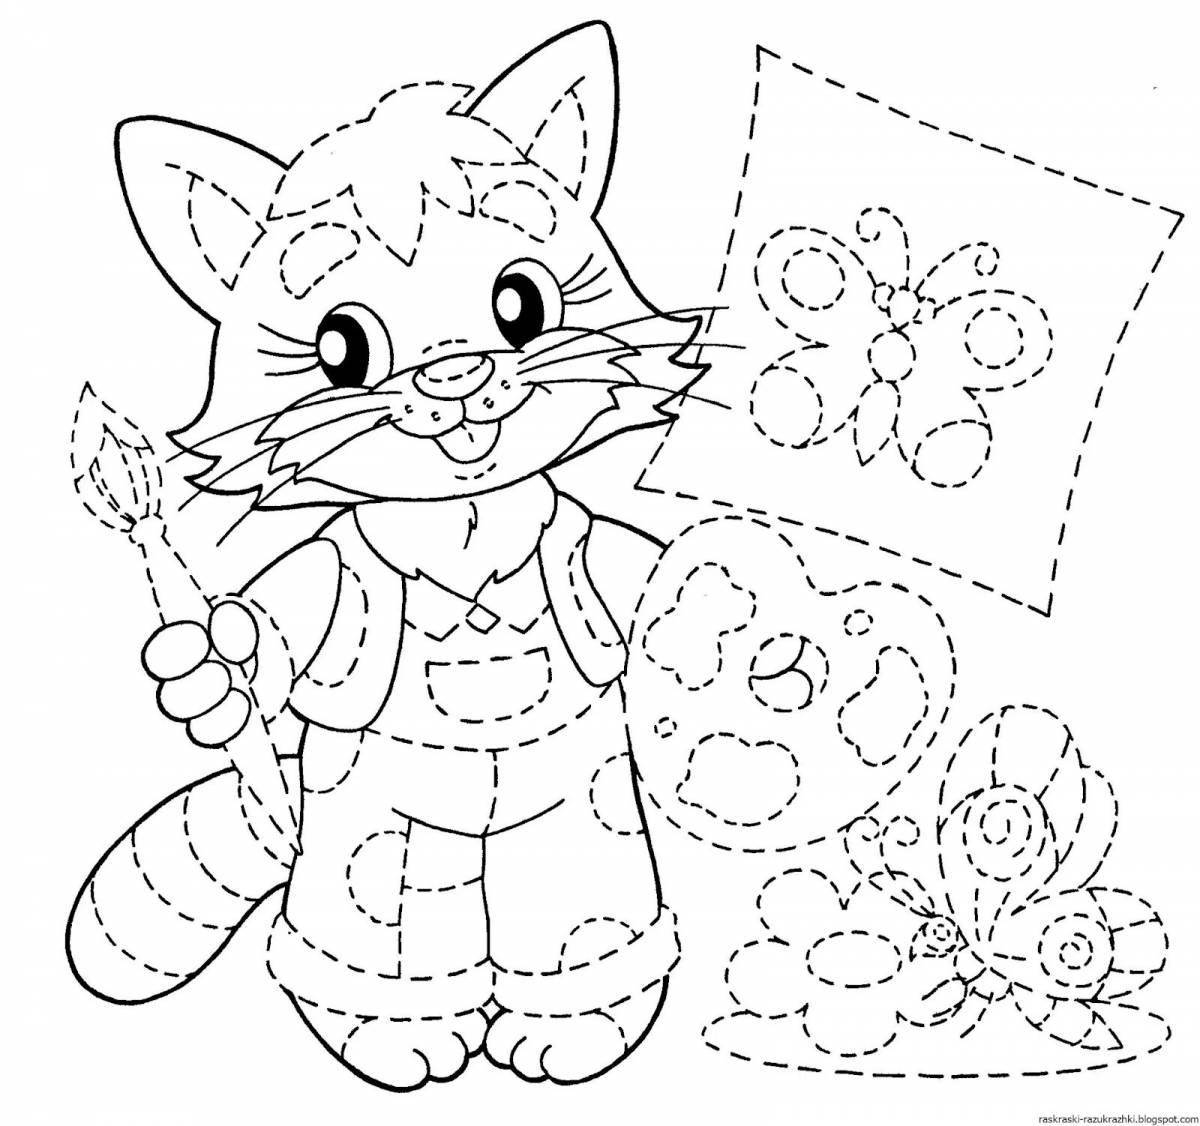 Exciting coloring page 6 years of development